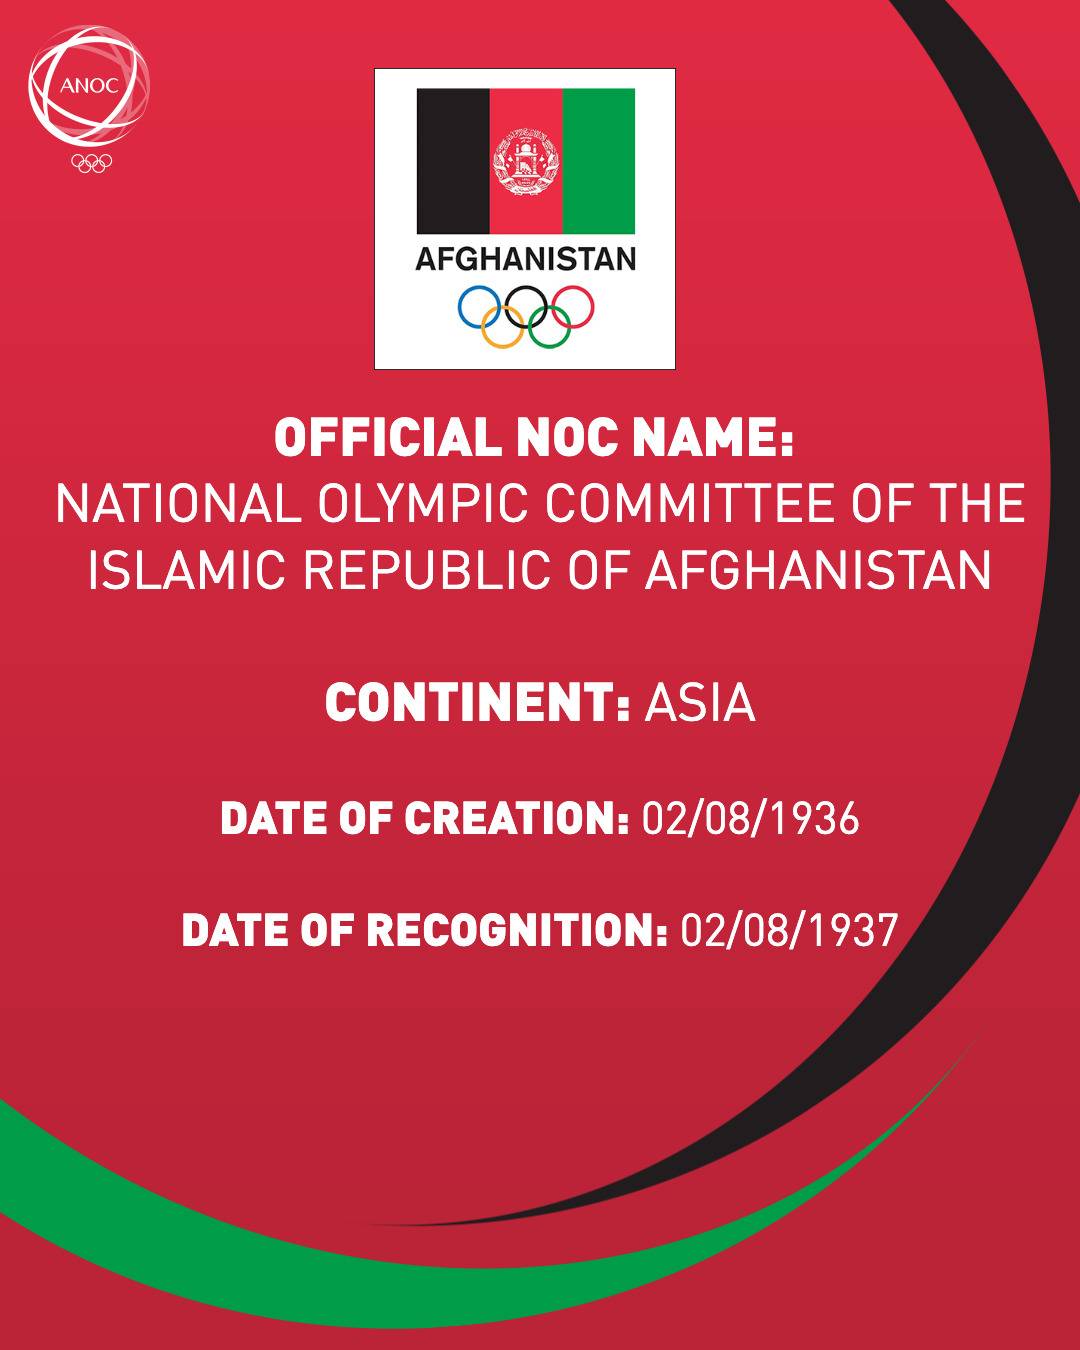 National Olympic Committee of the Islamic Republic of Afghanistan